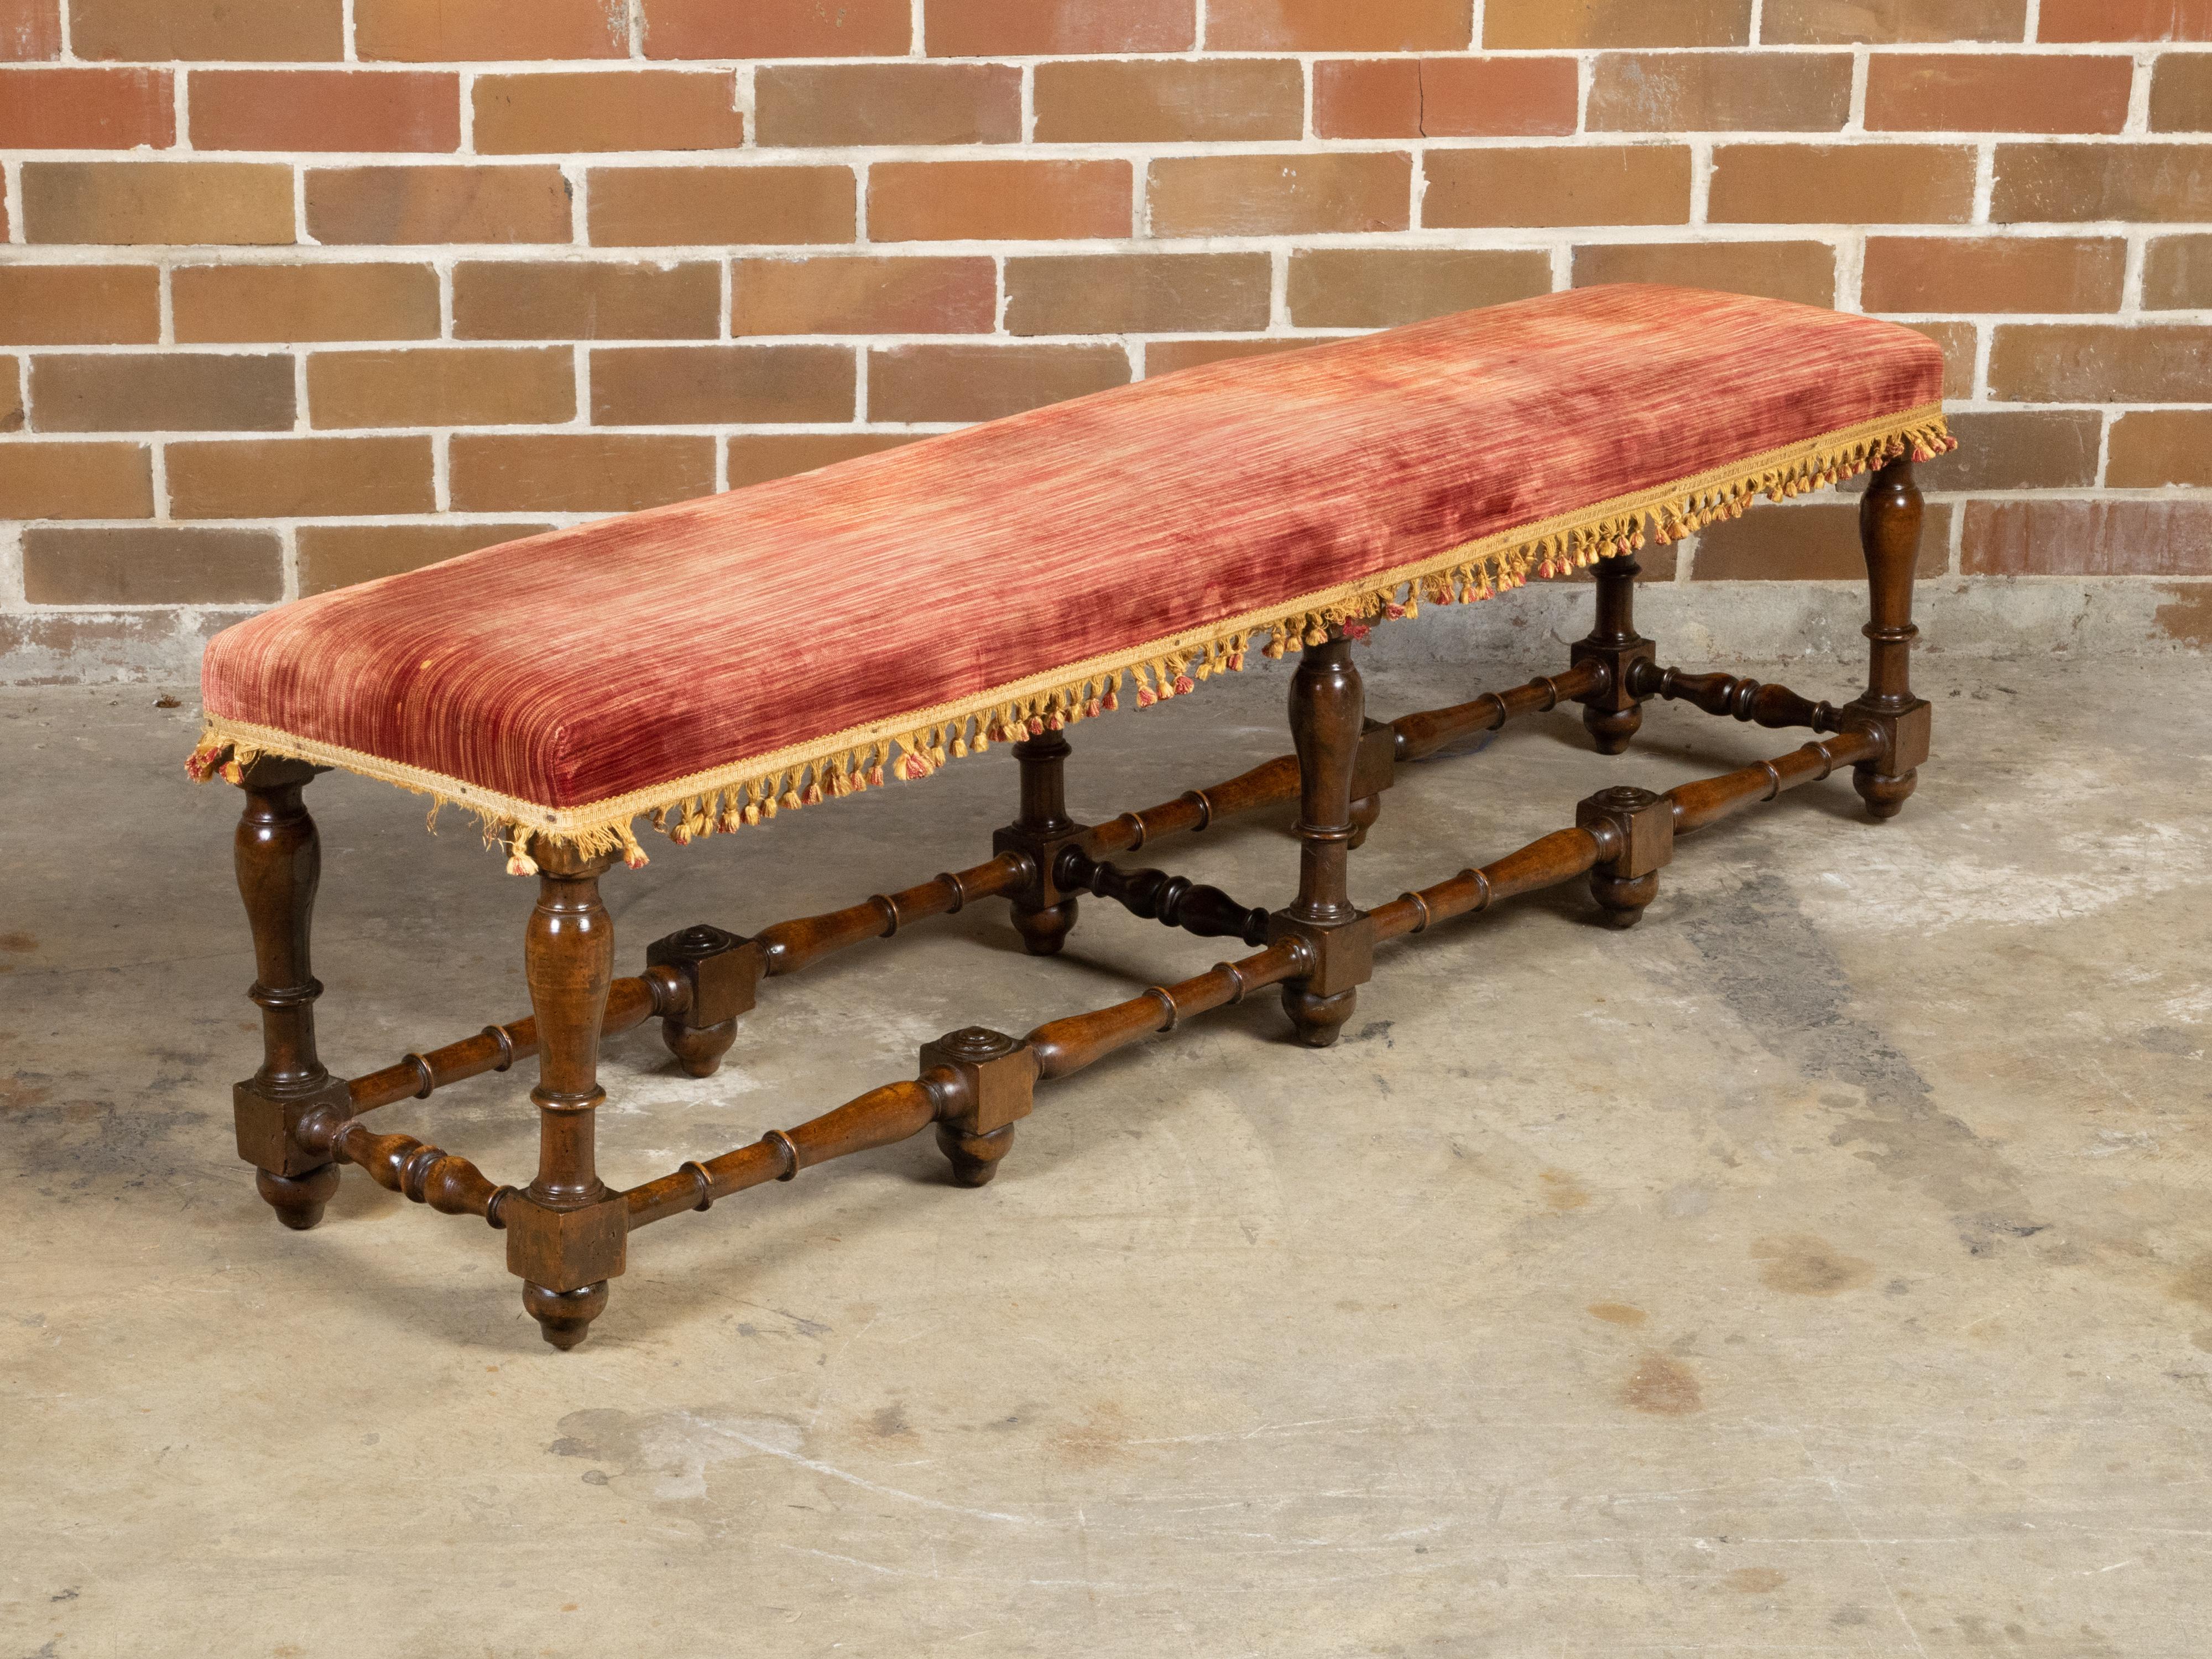 Italian 1820s Walnut Bench with Red Fabric, Turned Legs and Stretchers In Good Condition For Sale In Atlanta, GA